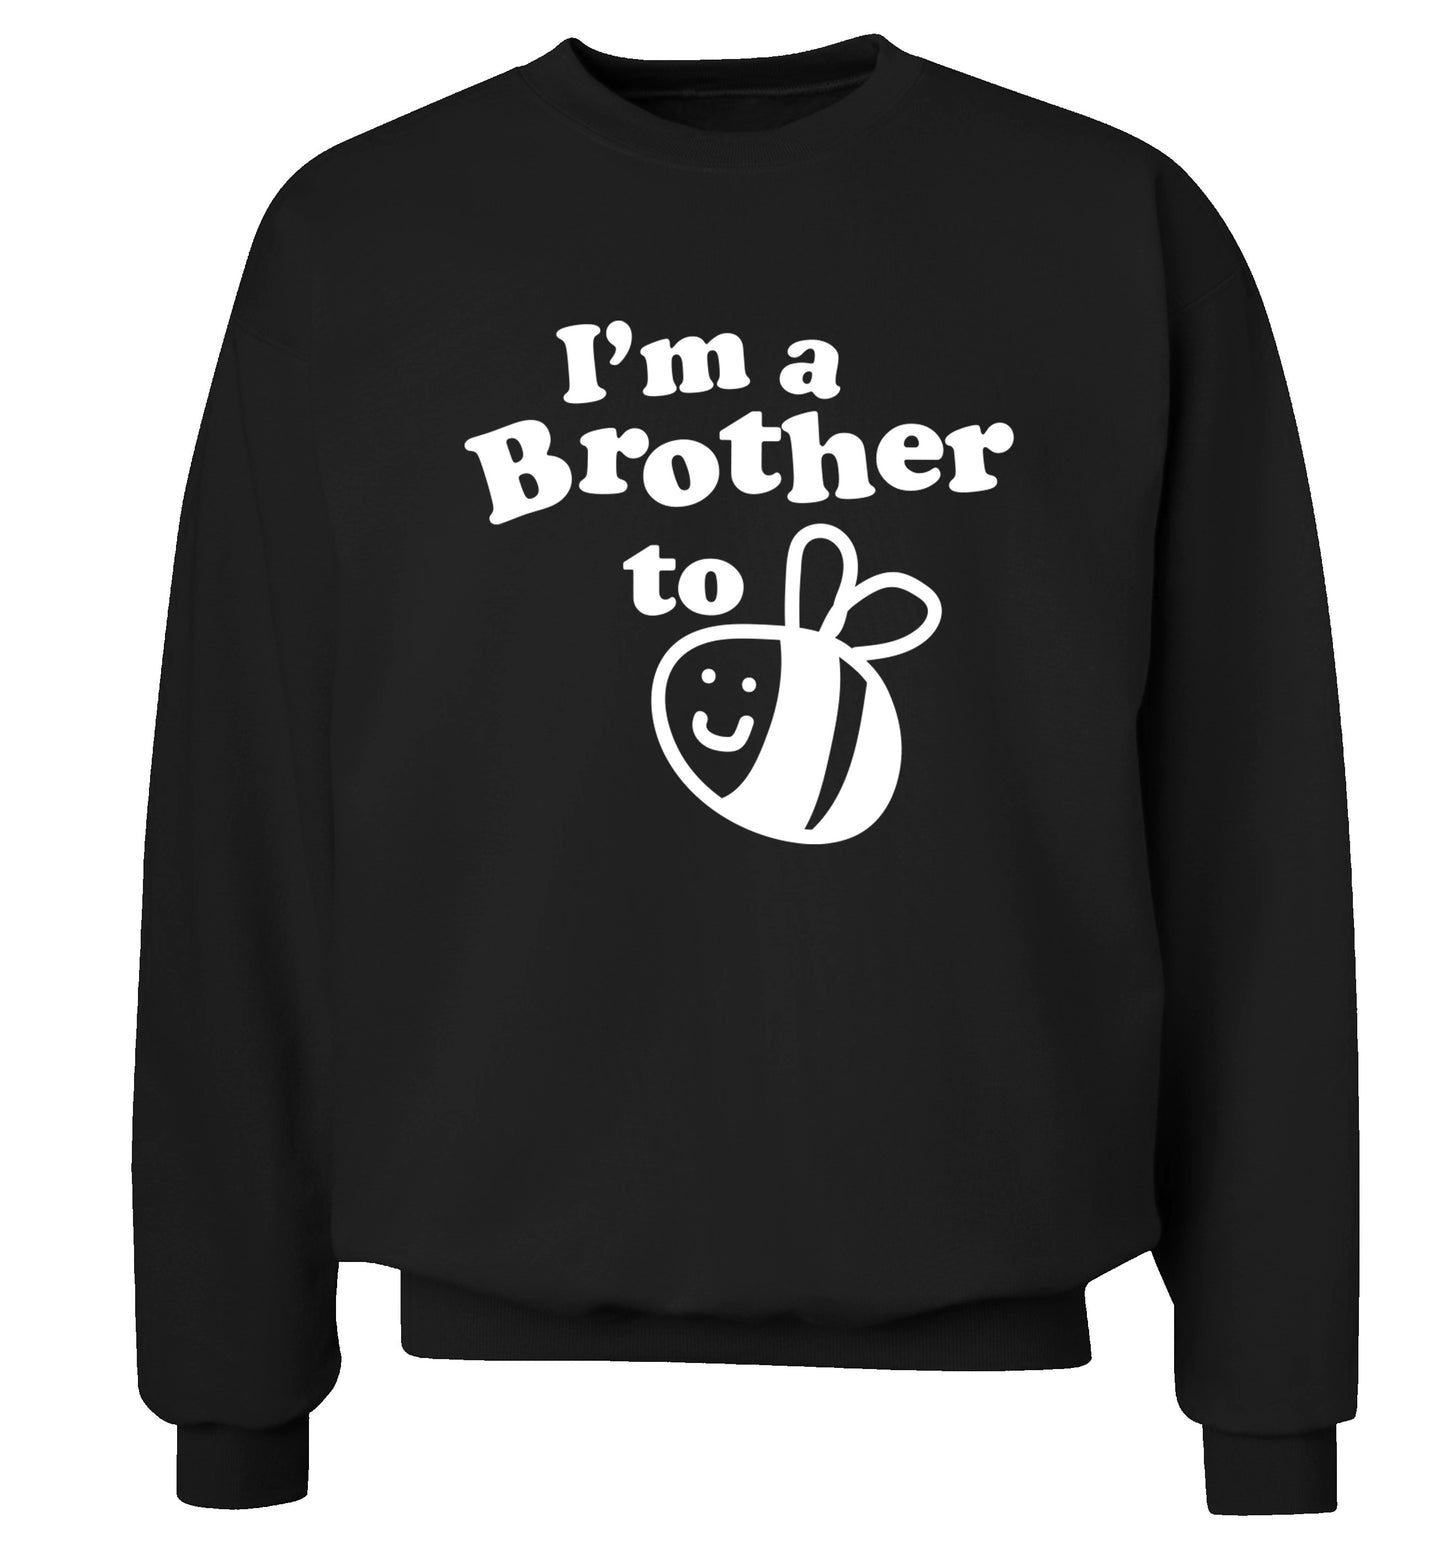 I'm a brother to be Adult's unisex black Sweater 2XL